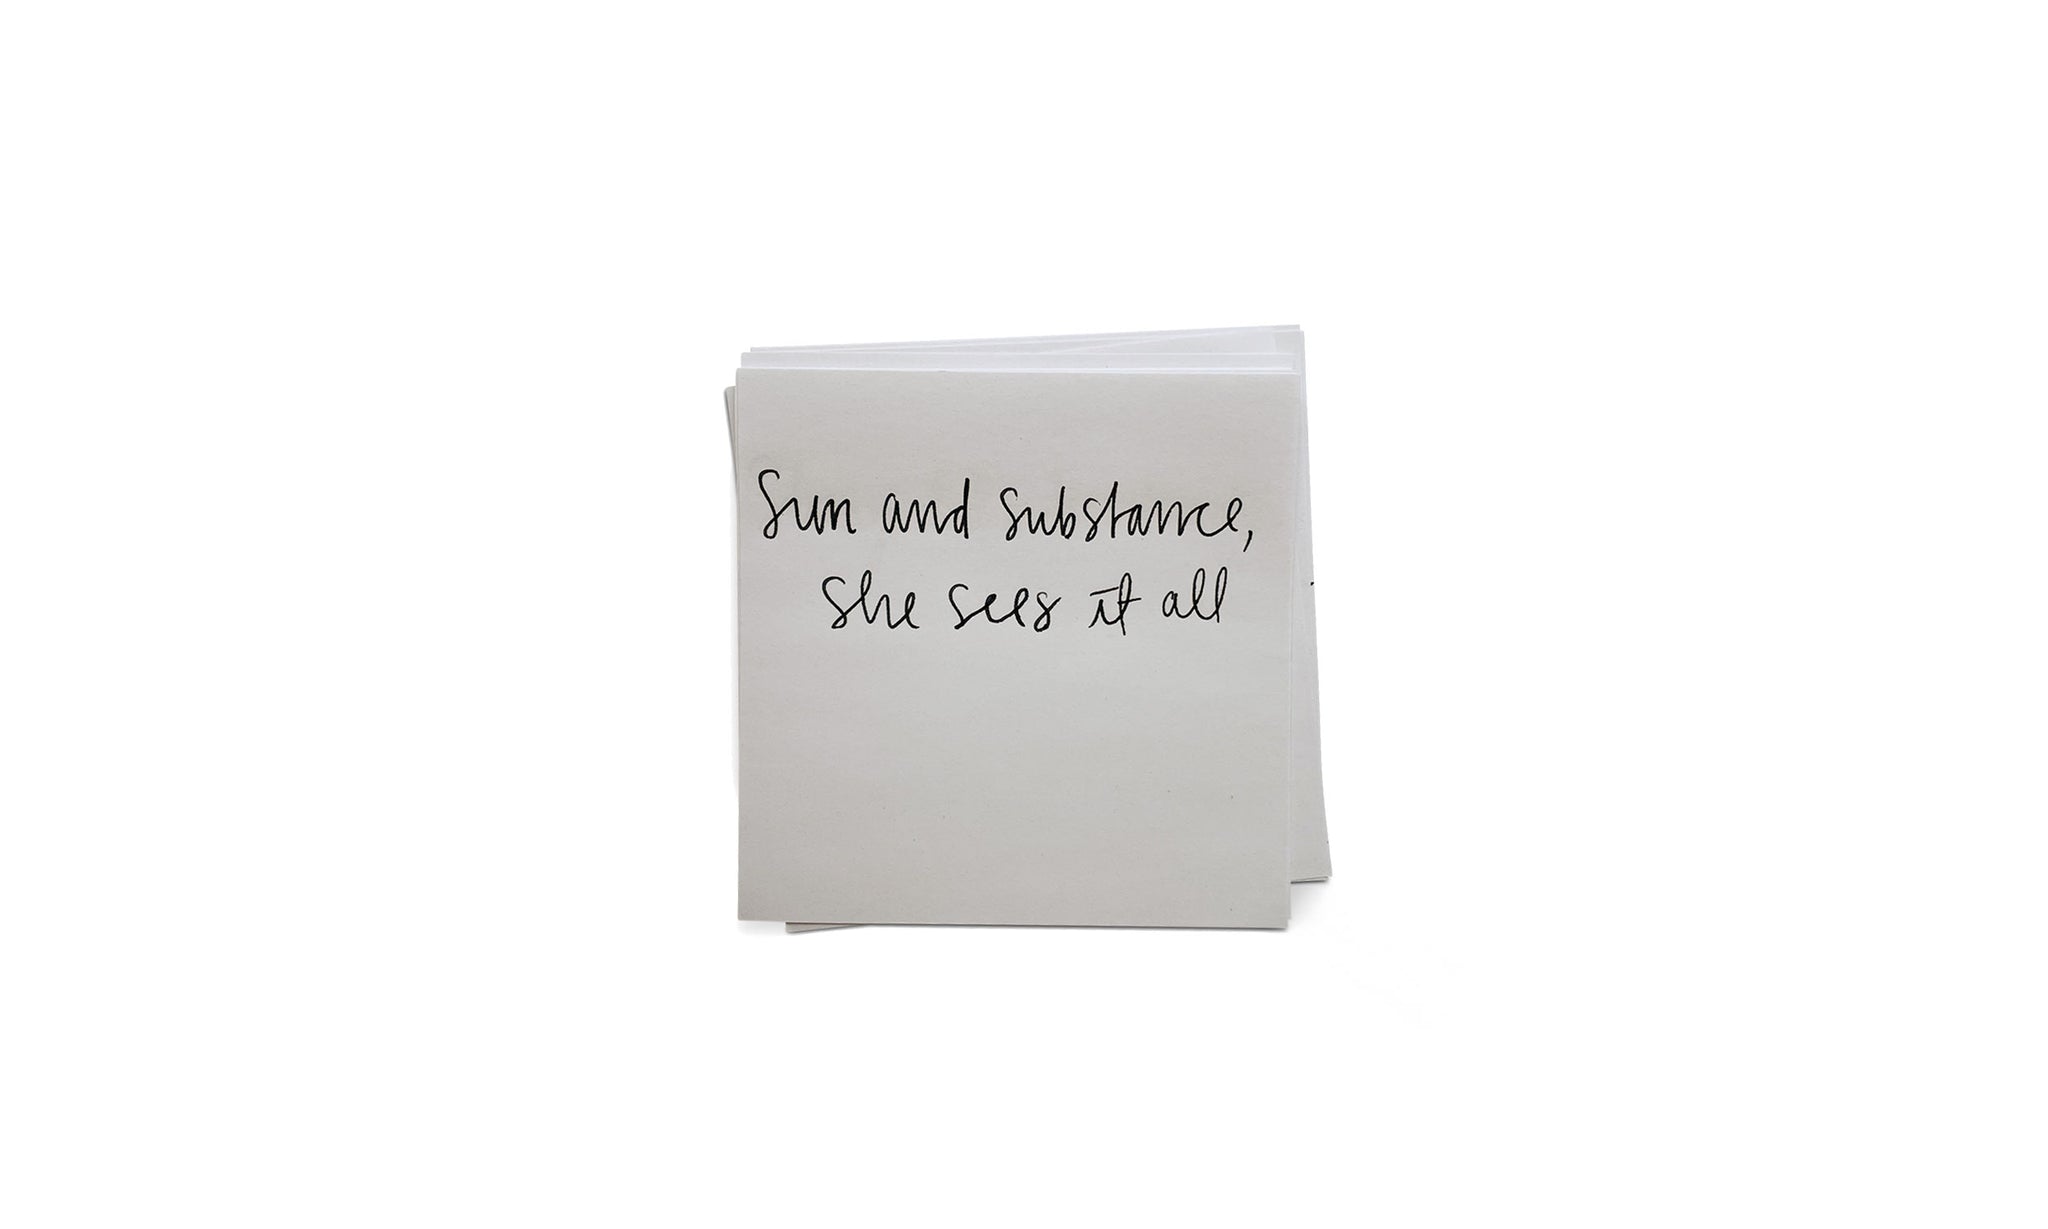 Handwritten note saying Sun and substance, she sees it all